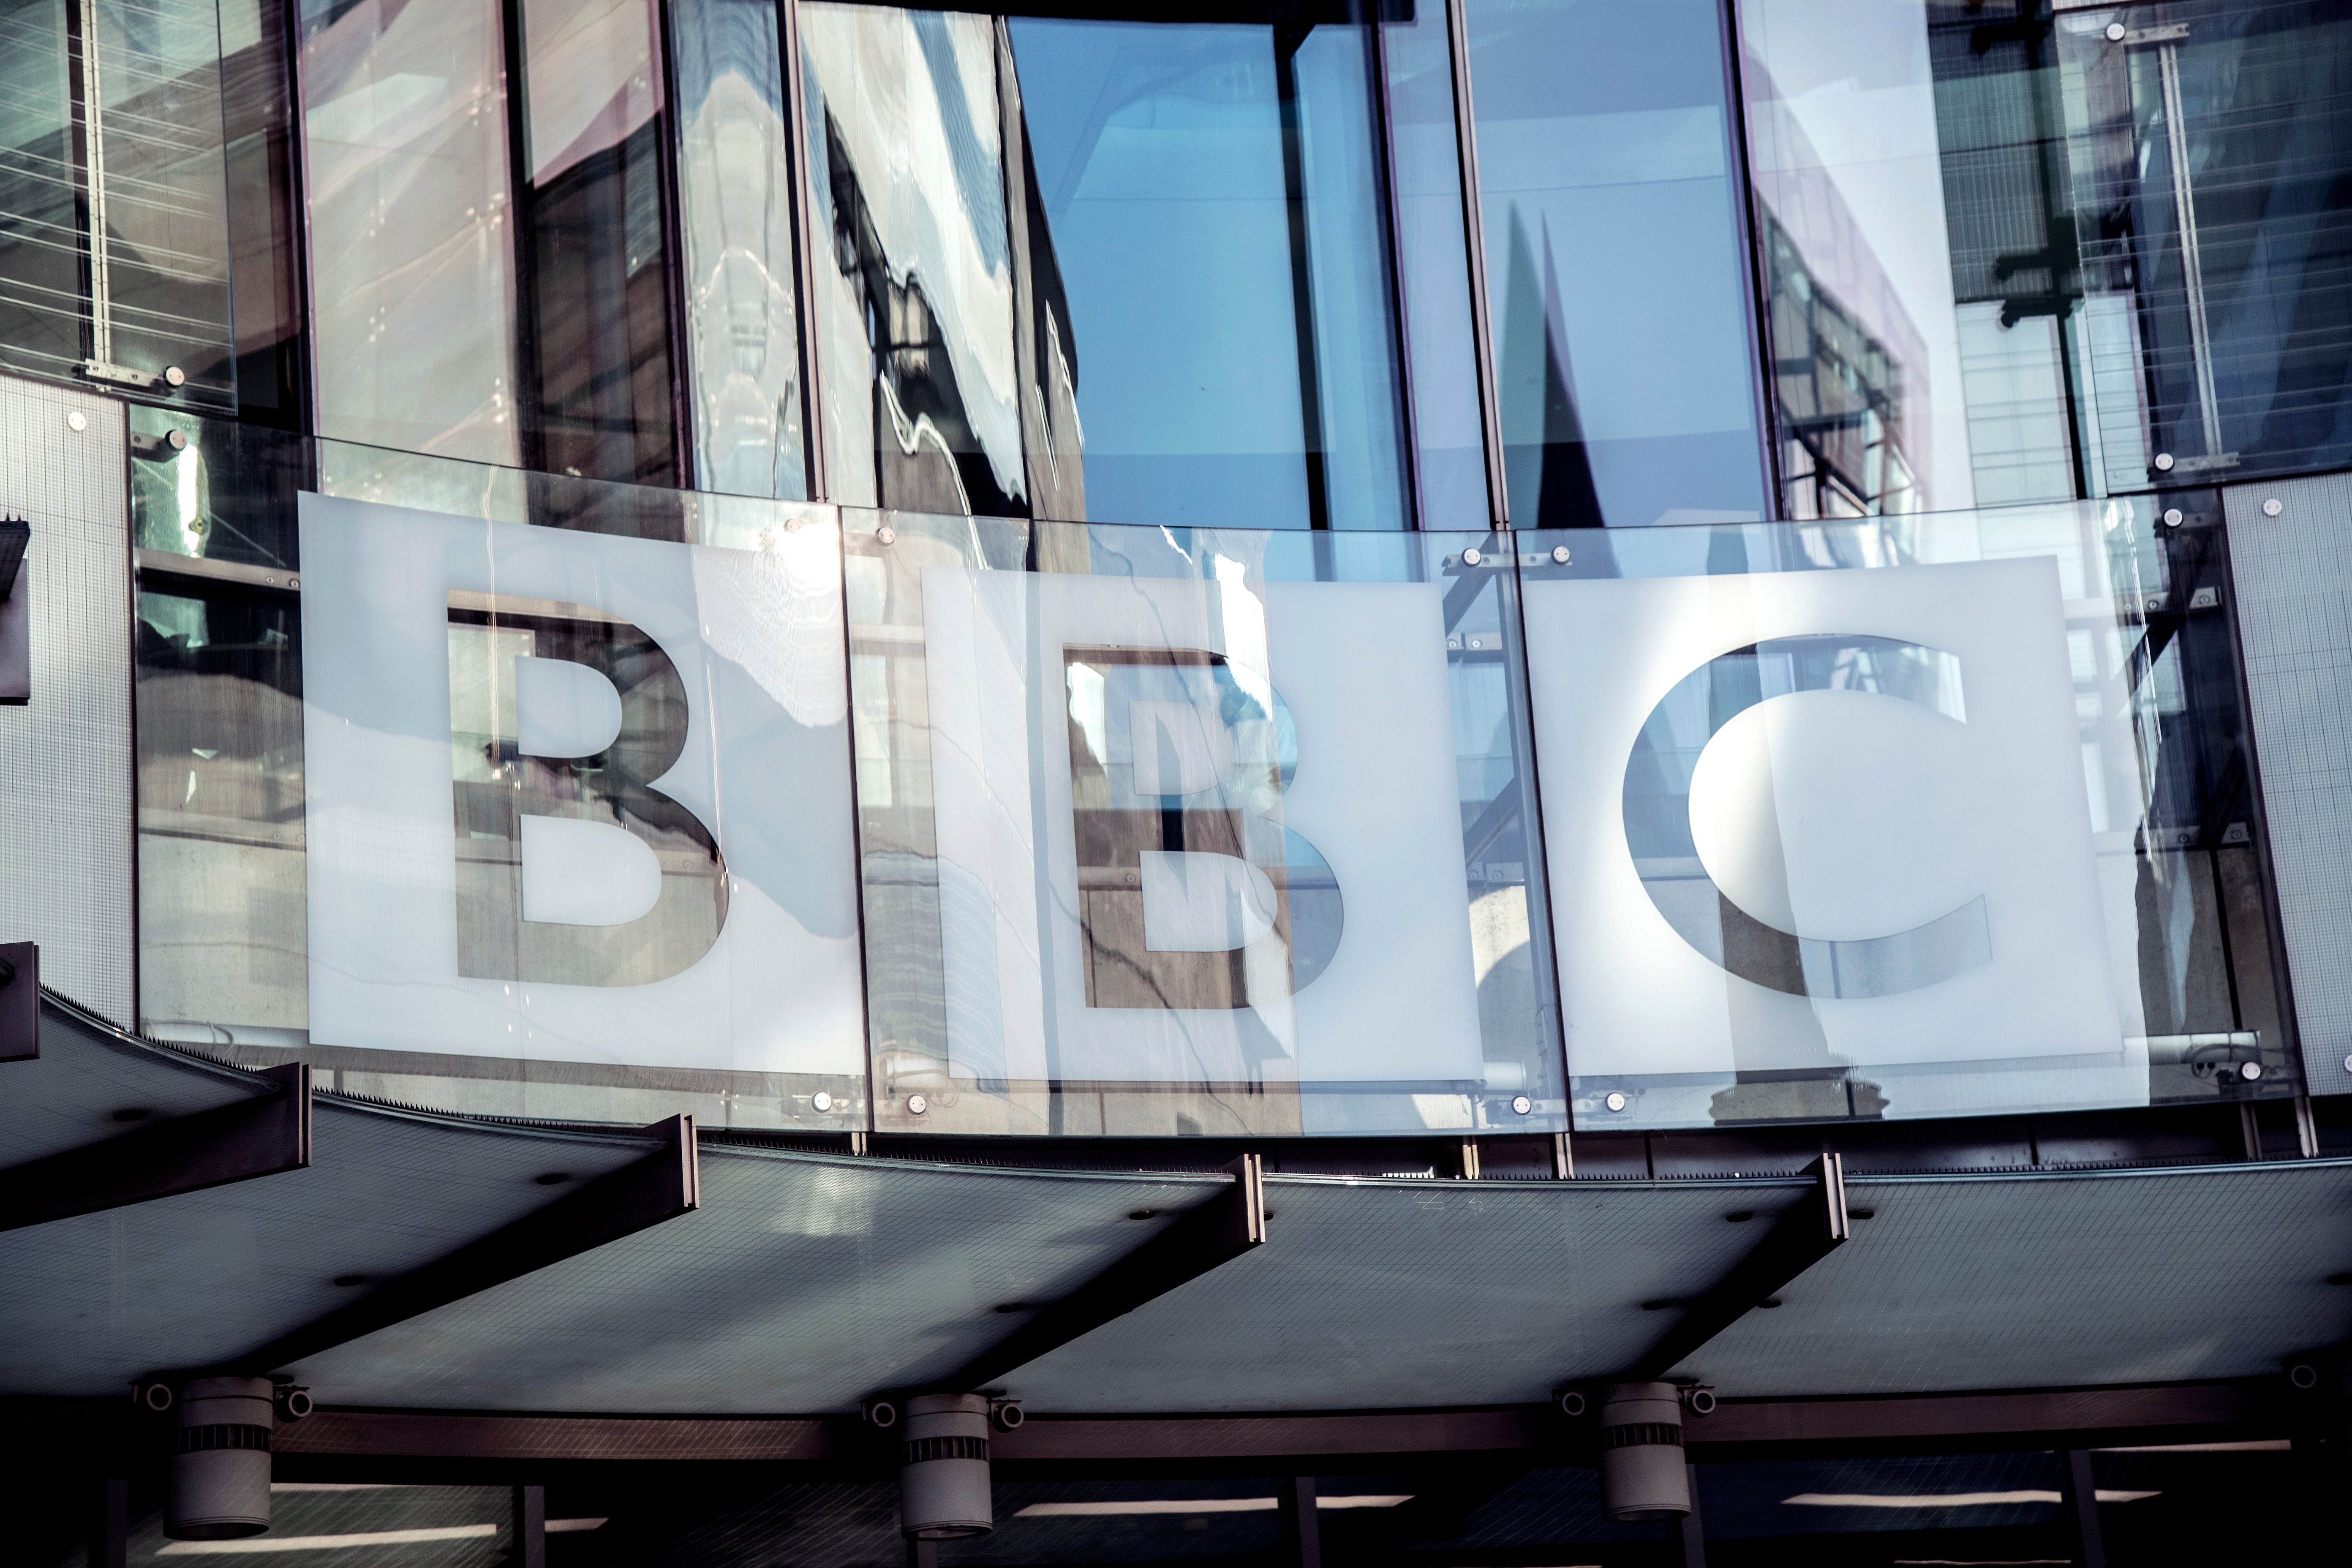 A woman was allegedly raped during the production of a new BBC cookery show